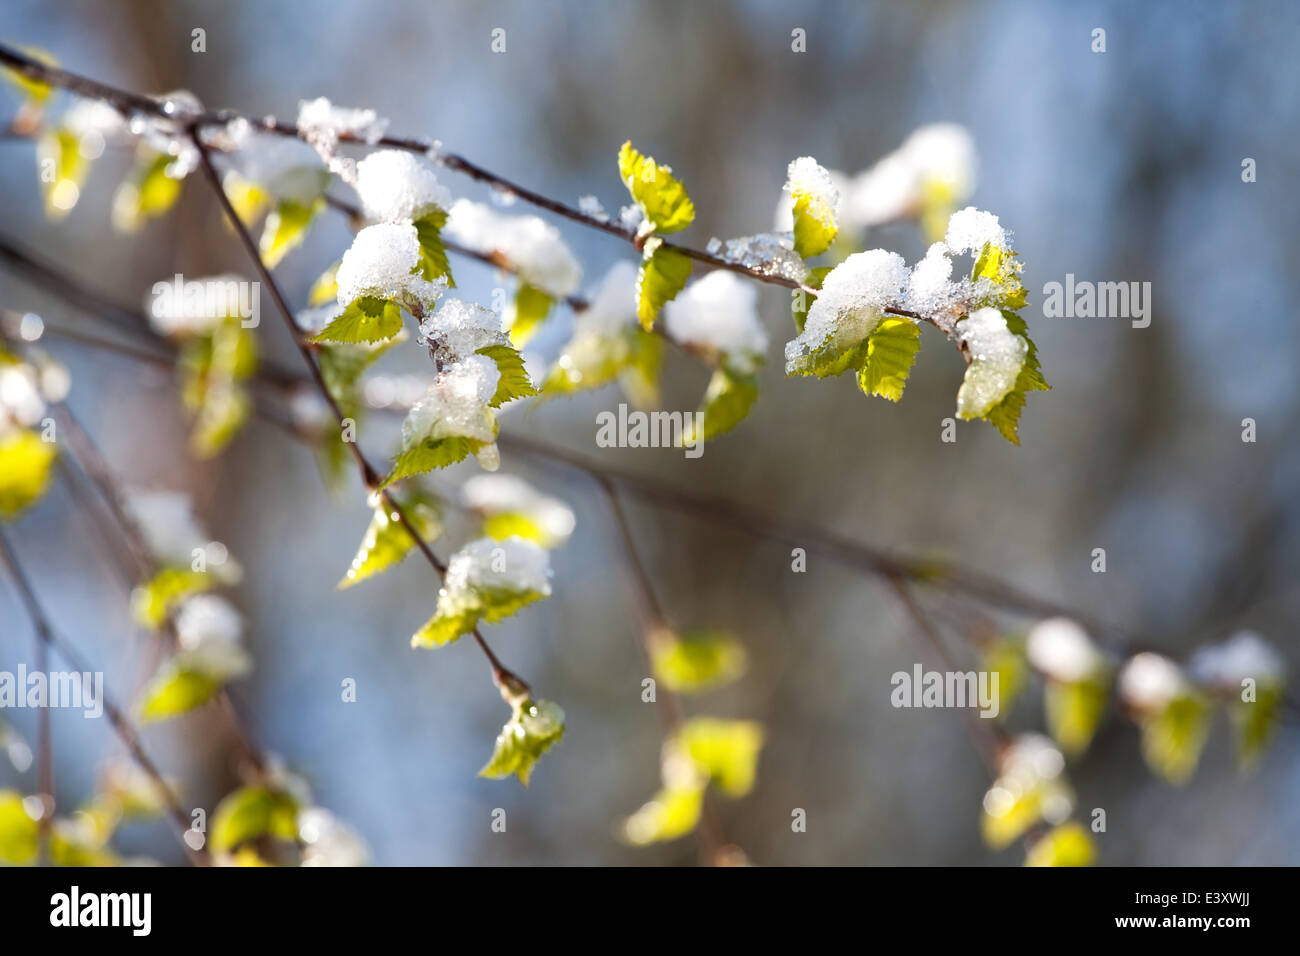 birch branch with young green leaves under sudden snow on outdoor background Stock Photo